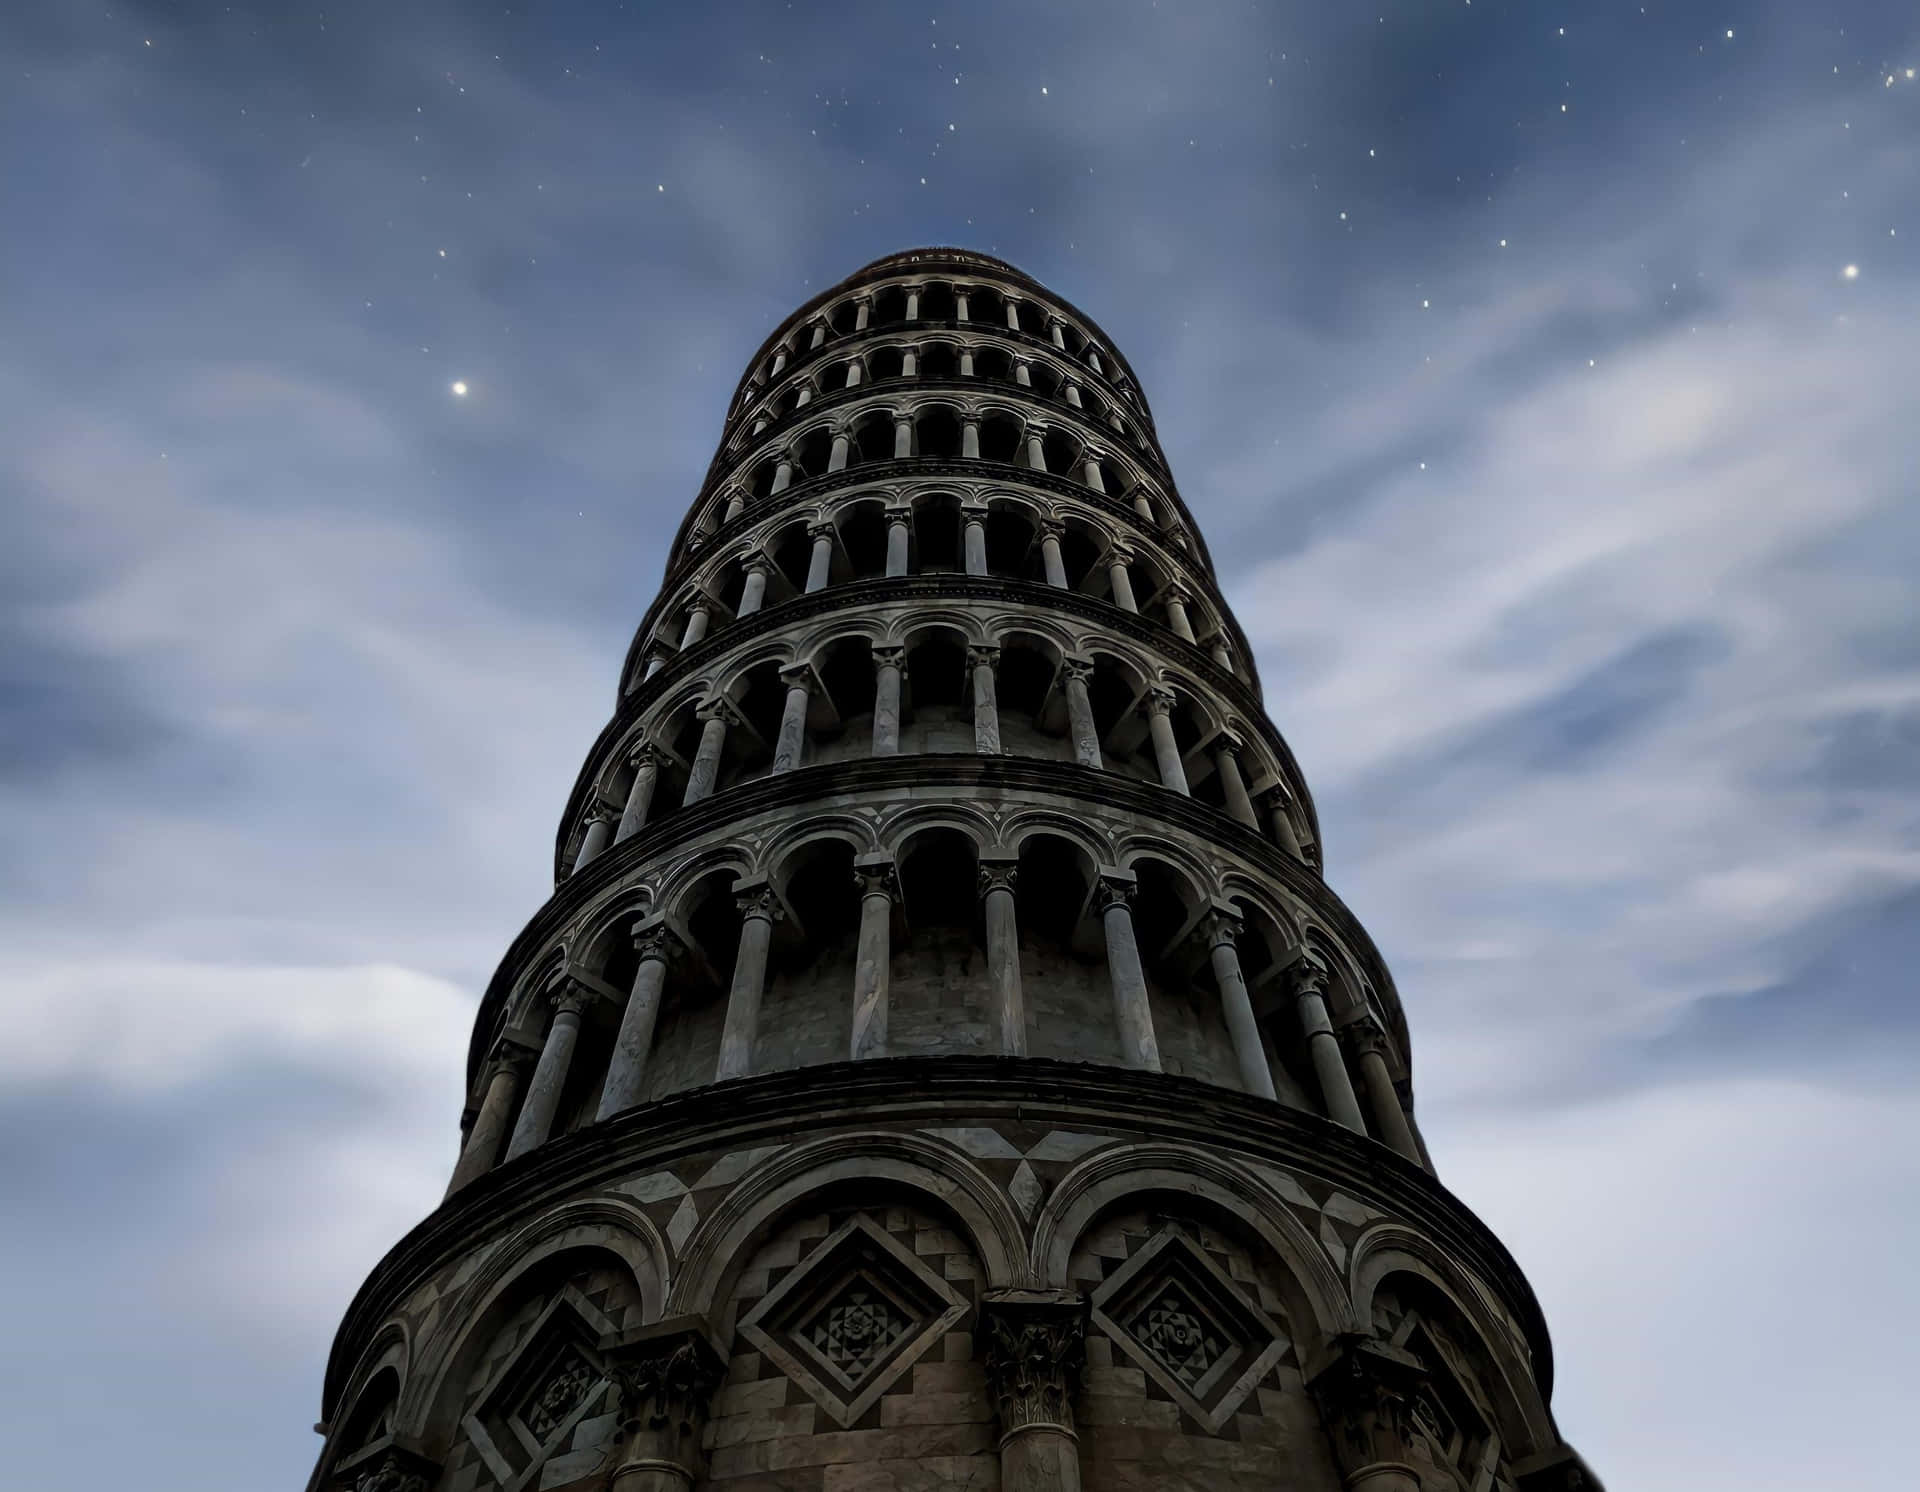 The Tower Of Pisa Underneath The Stars Wallpaper